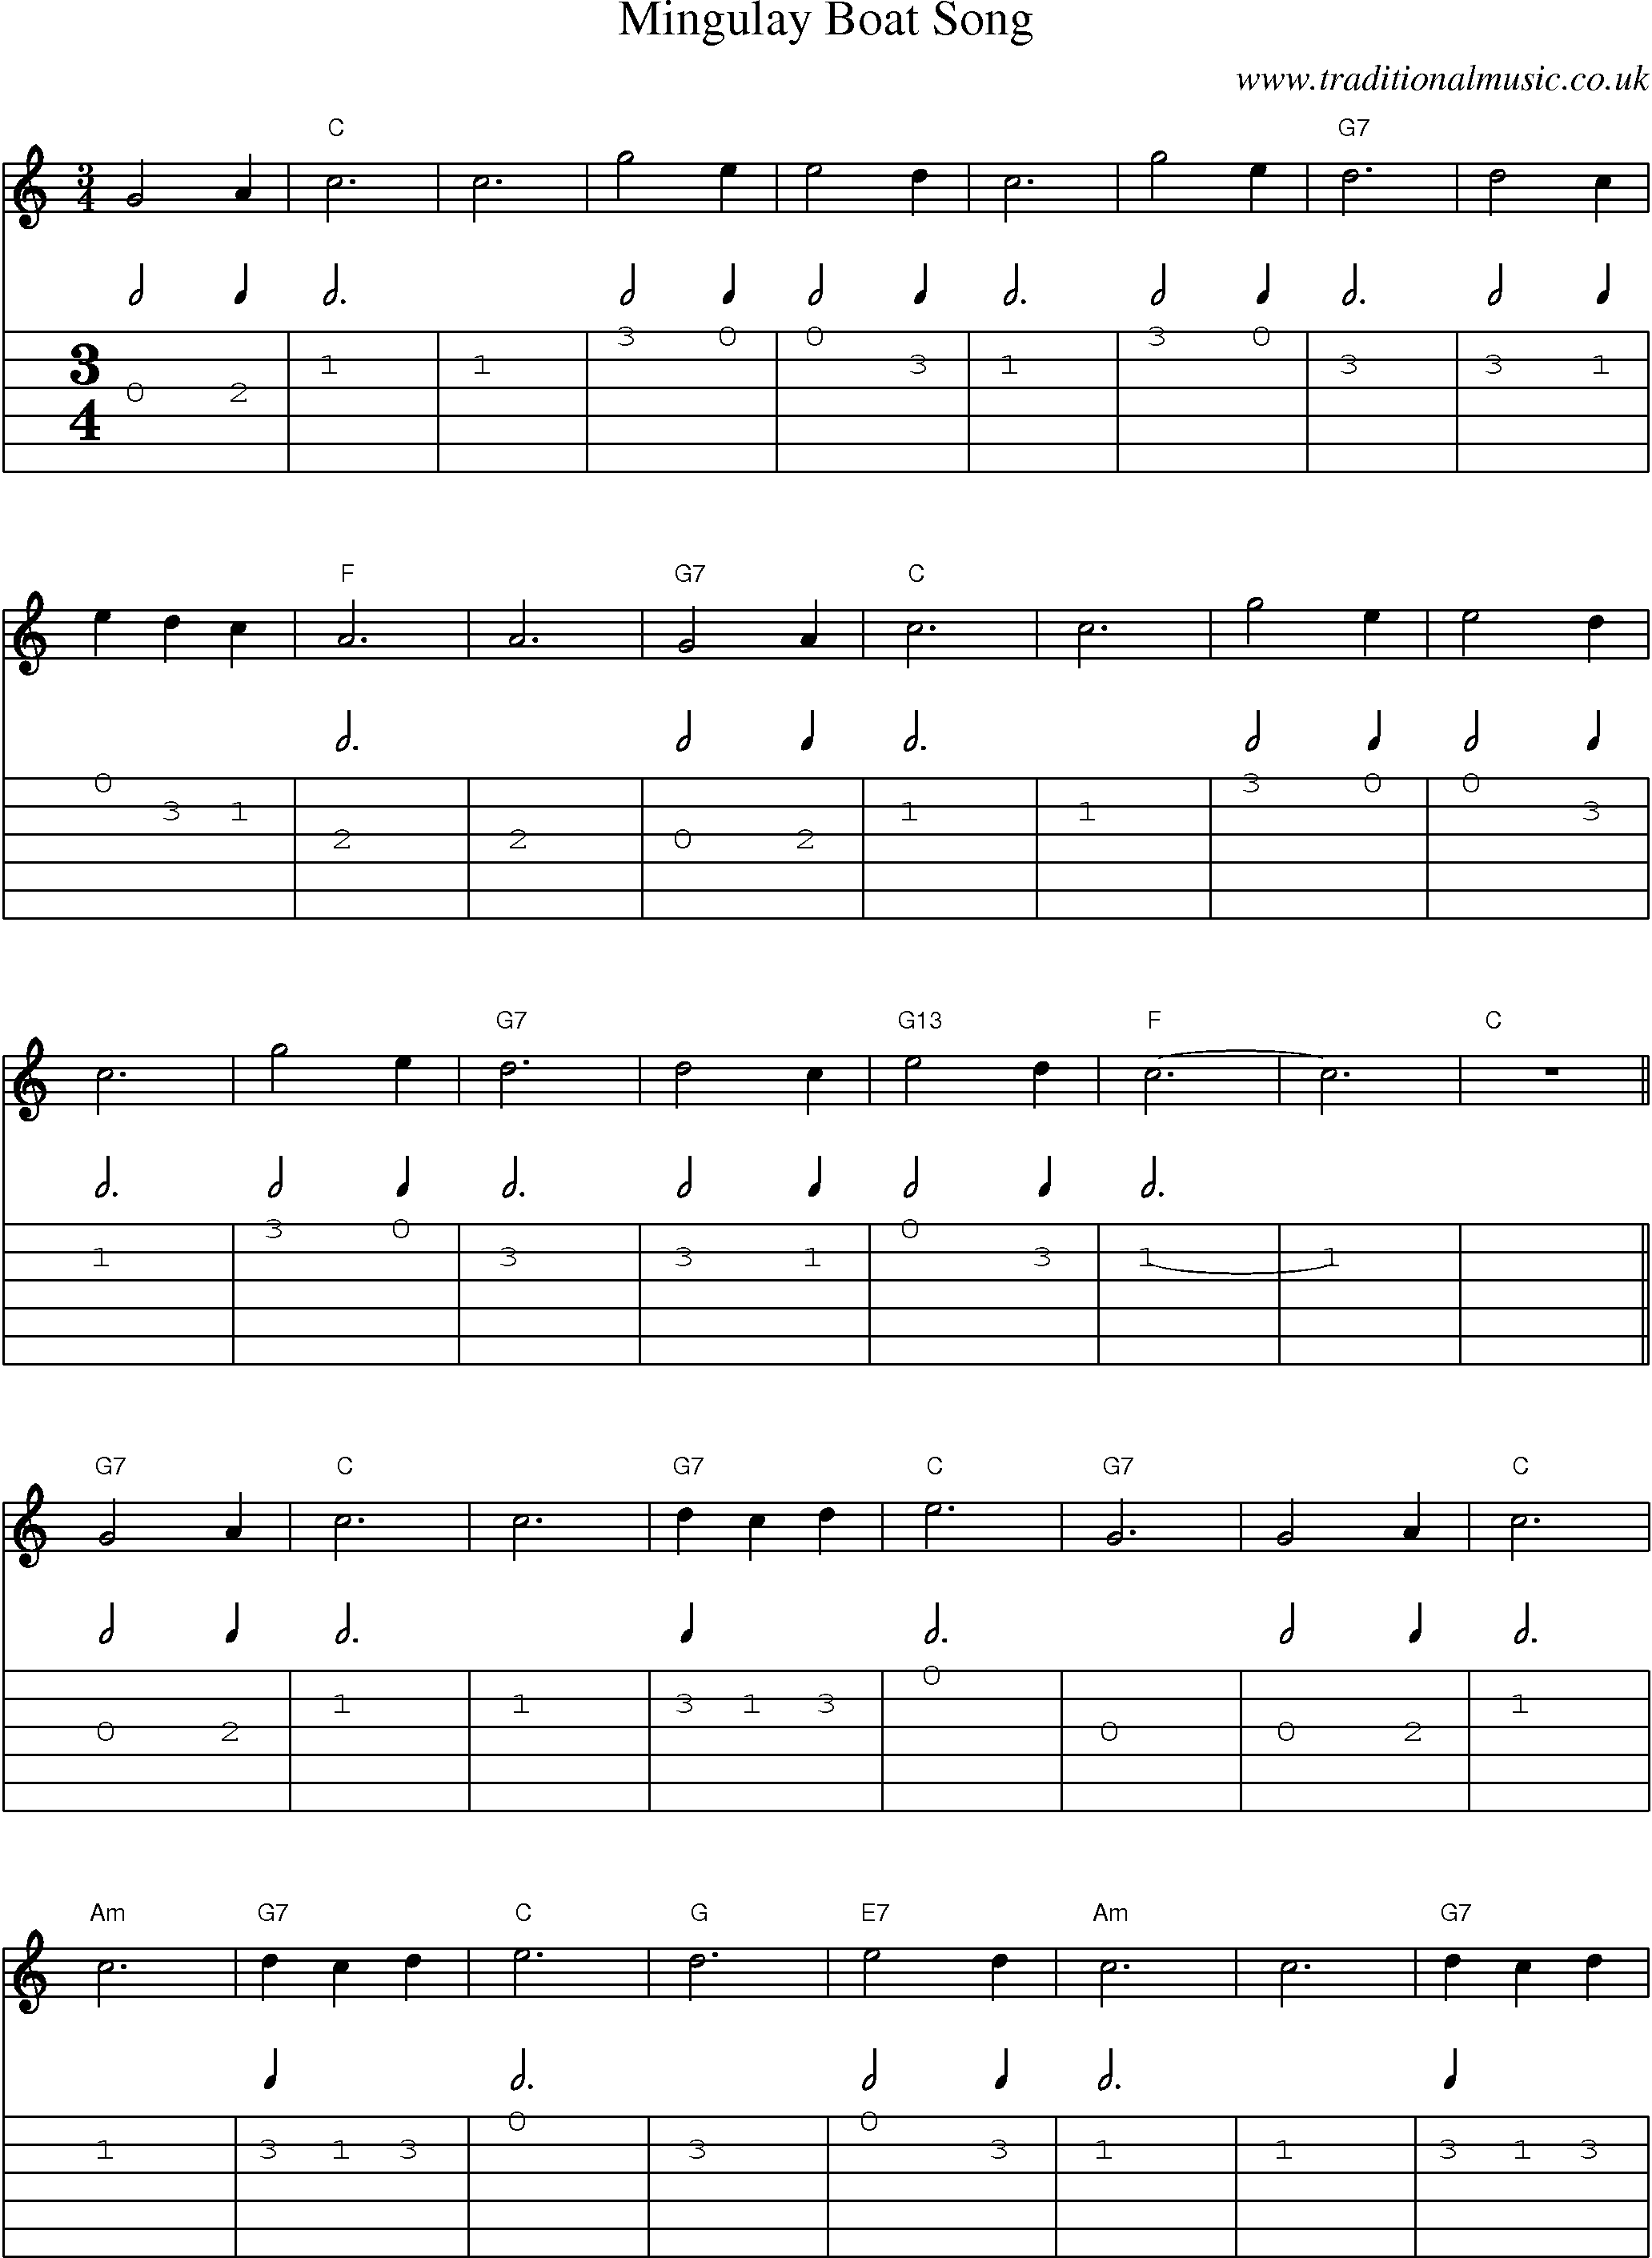 Music Score and Guitar Tabs for Mingulay Boat Song